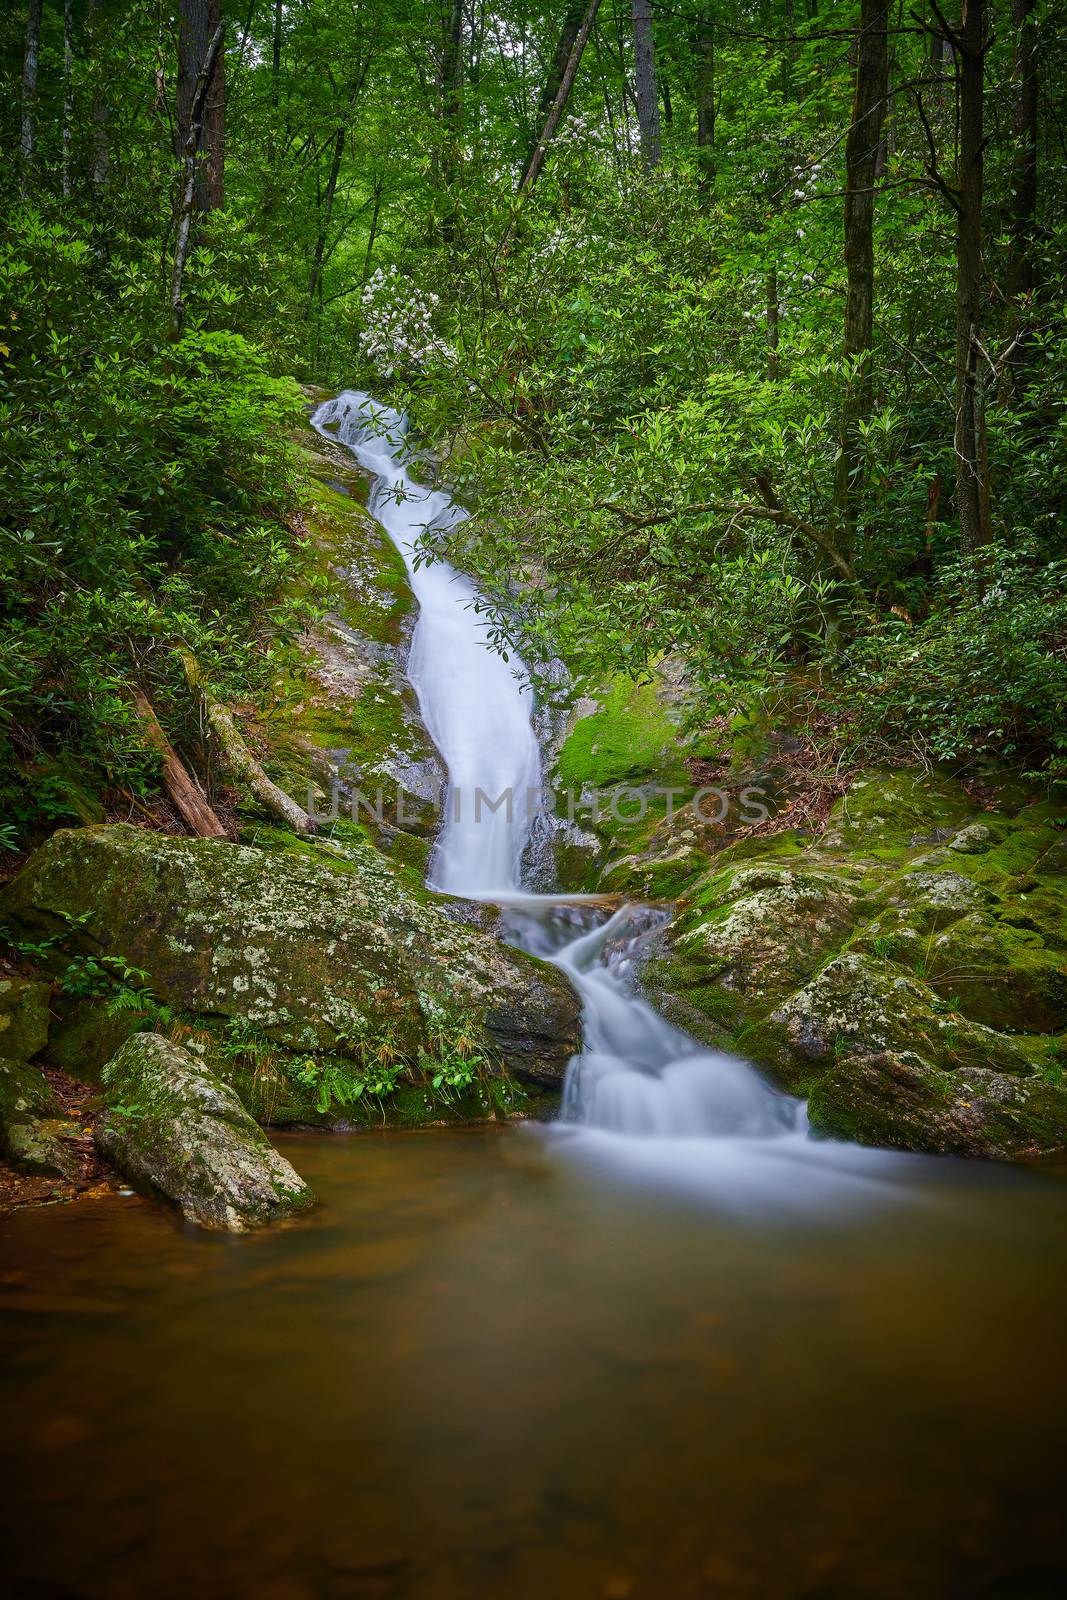 Ribbon waterfall in Pisgah National Forest, NC. by patrickstock